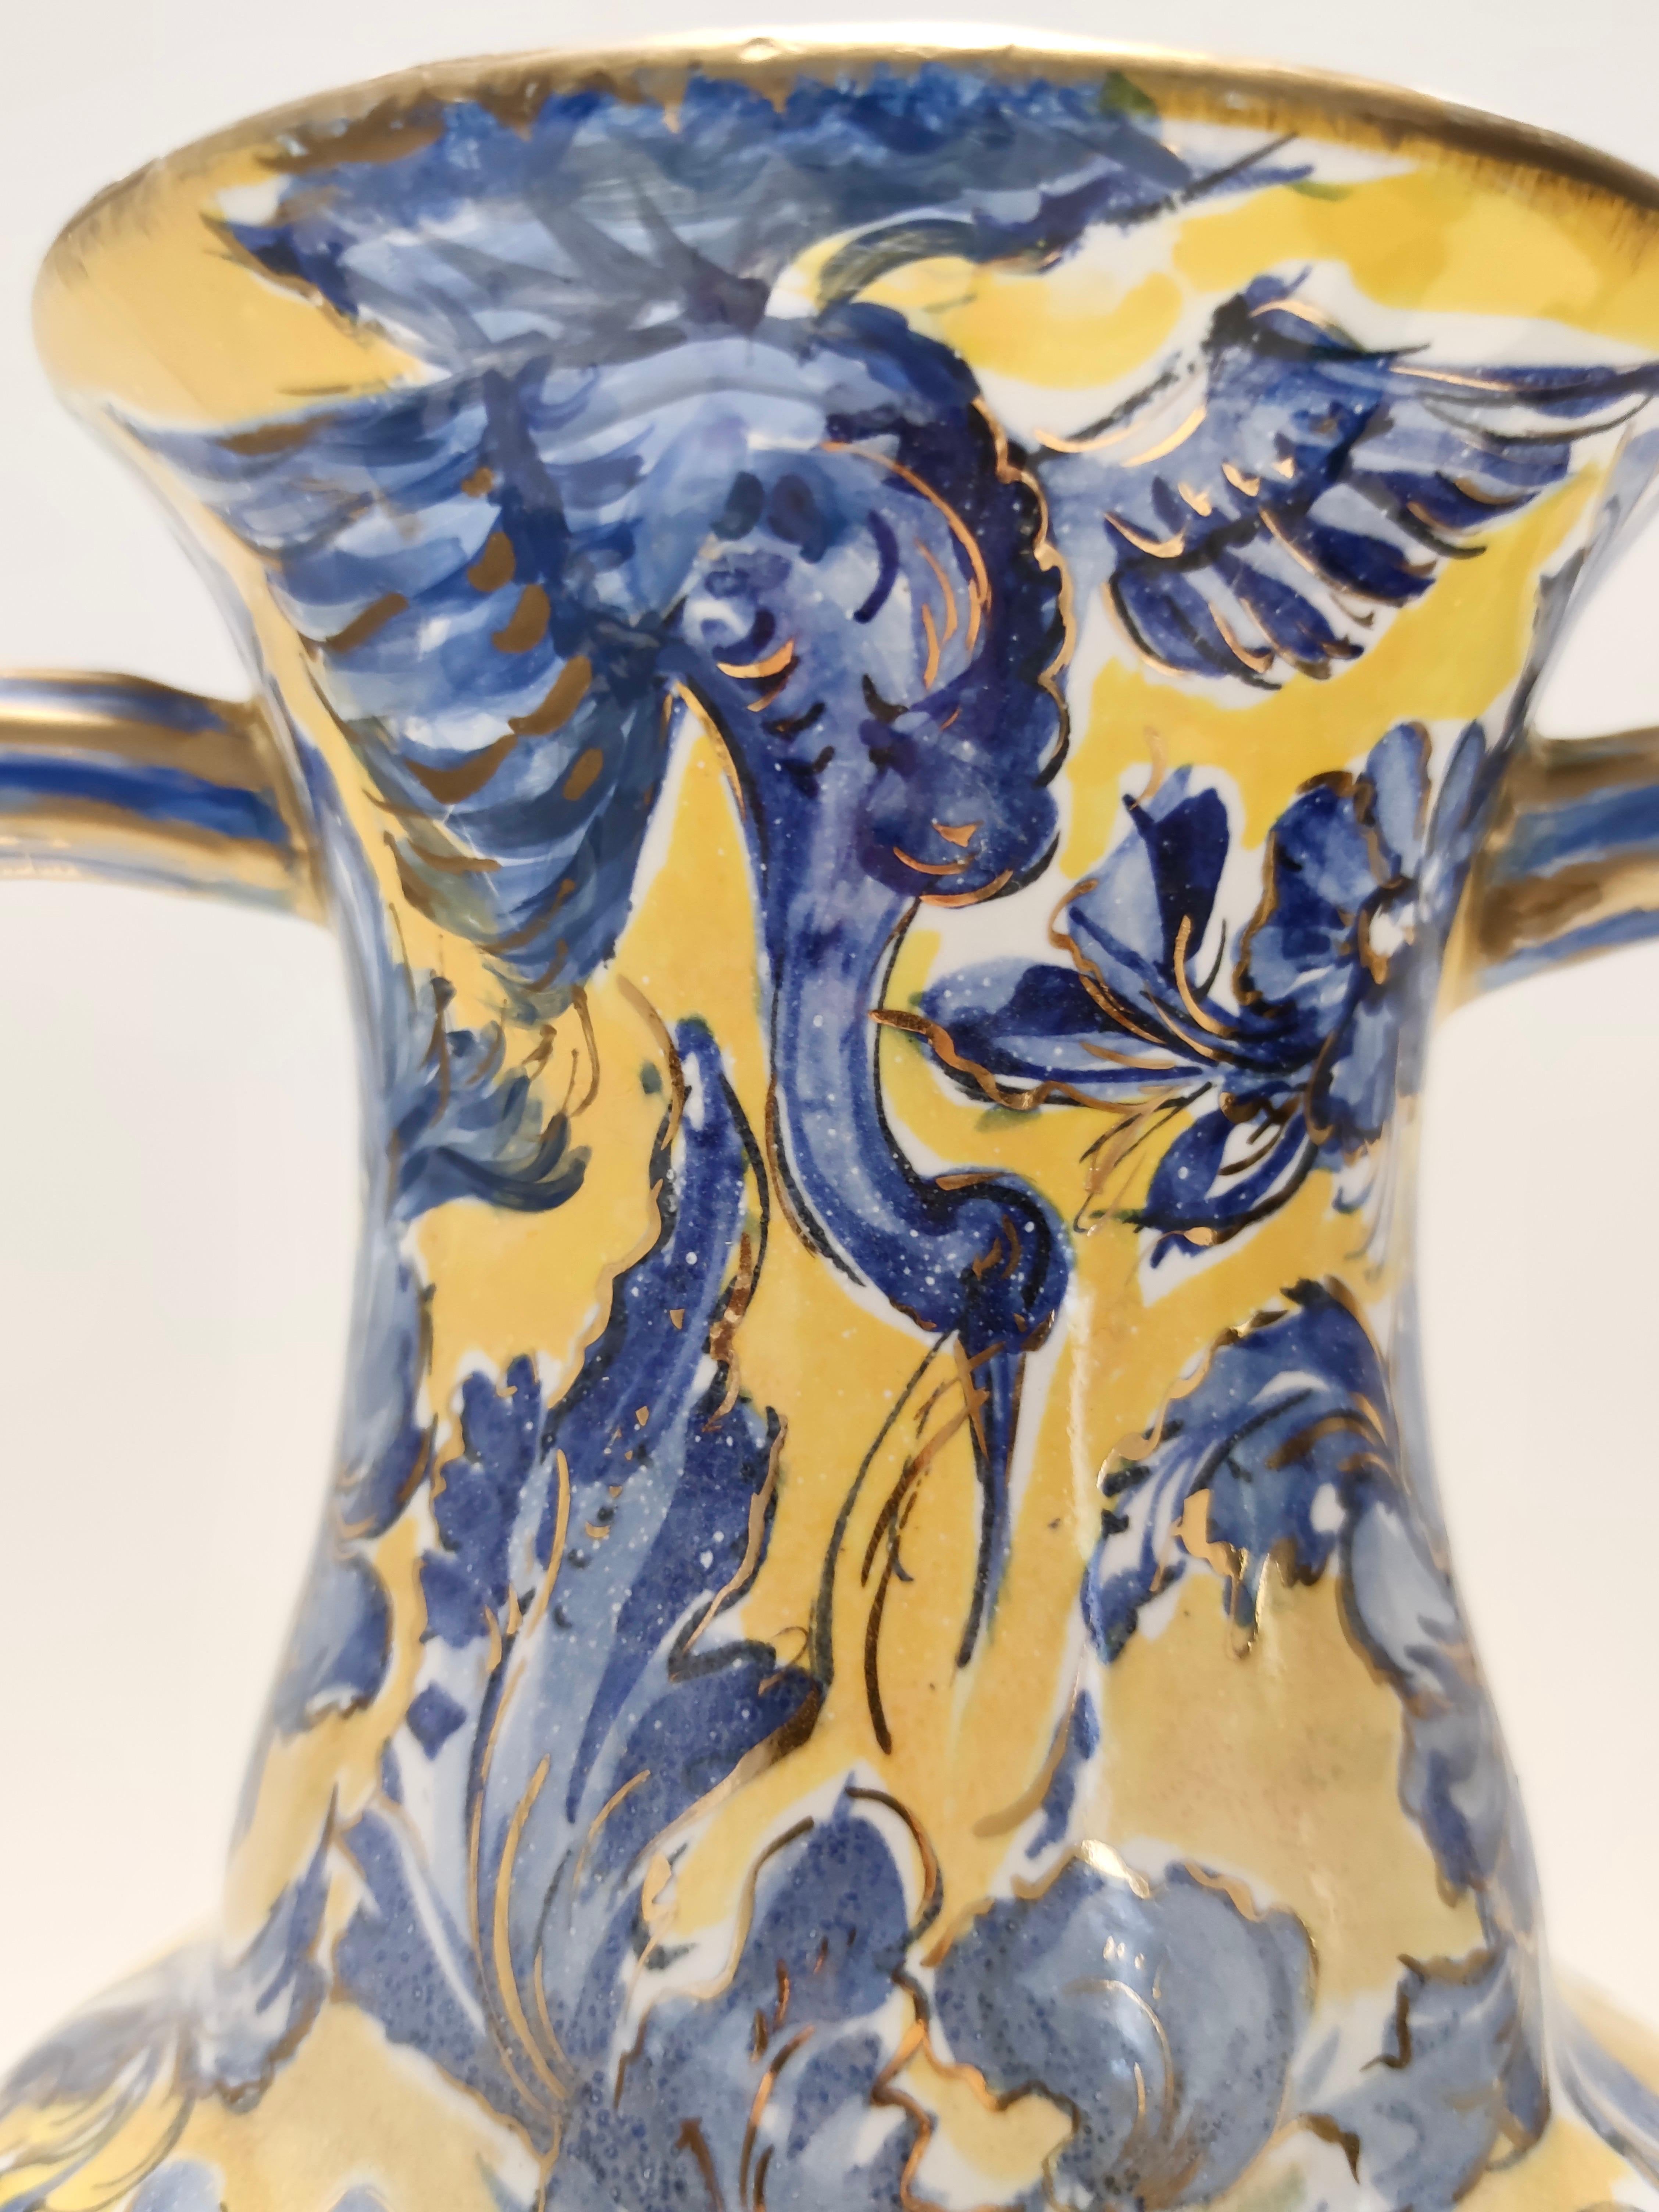 Handmade Yellow and Blue Glazed Ceramic Amphora Vase by Zulimo Aretini, Italy For Sale 7